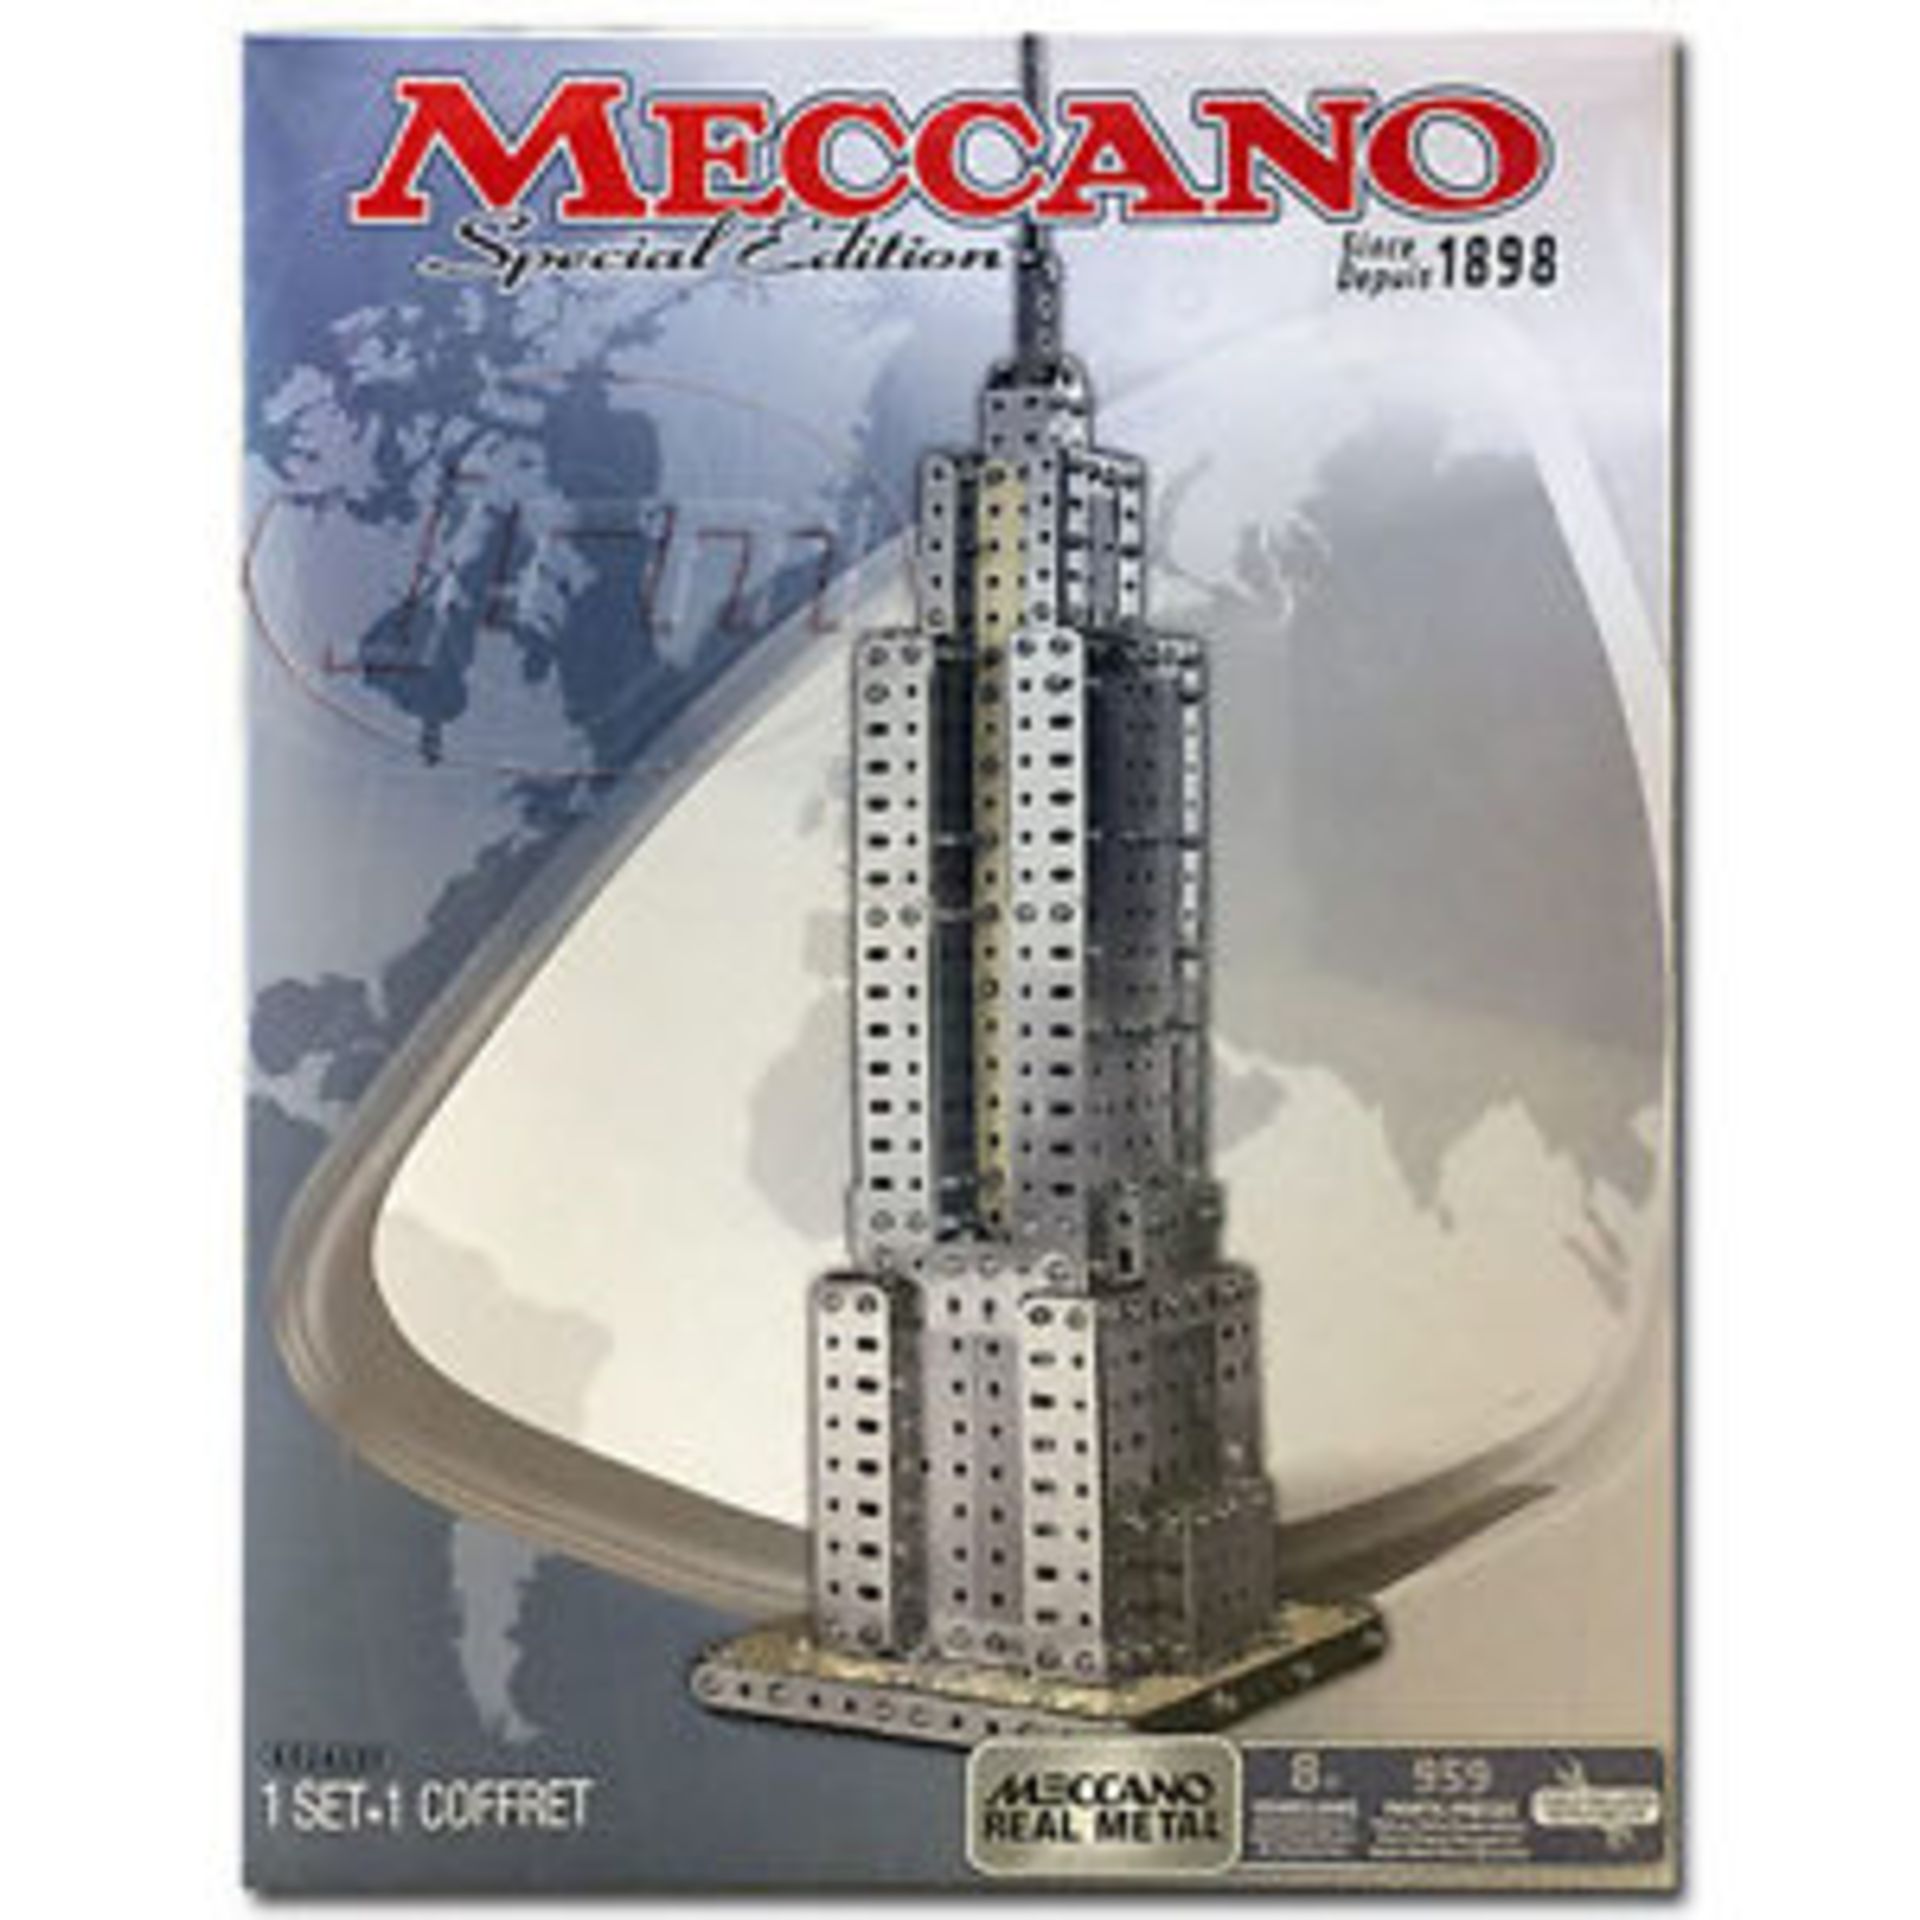 V Brand New Meccano Special Edition Empire State Building 959 Metal Parts - 2 Tool Kits And 1 - Image 2 of 2